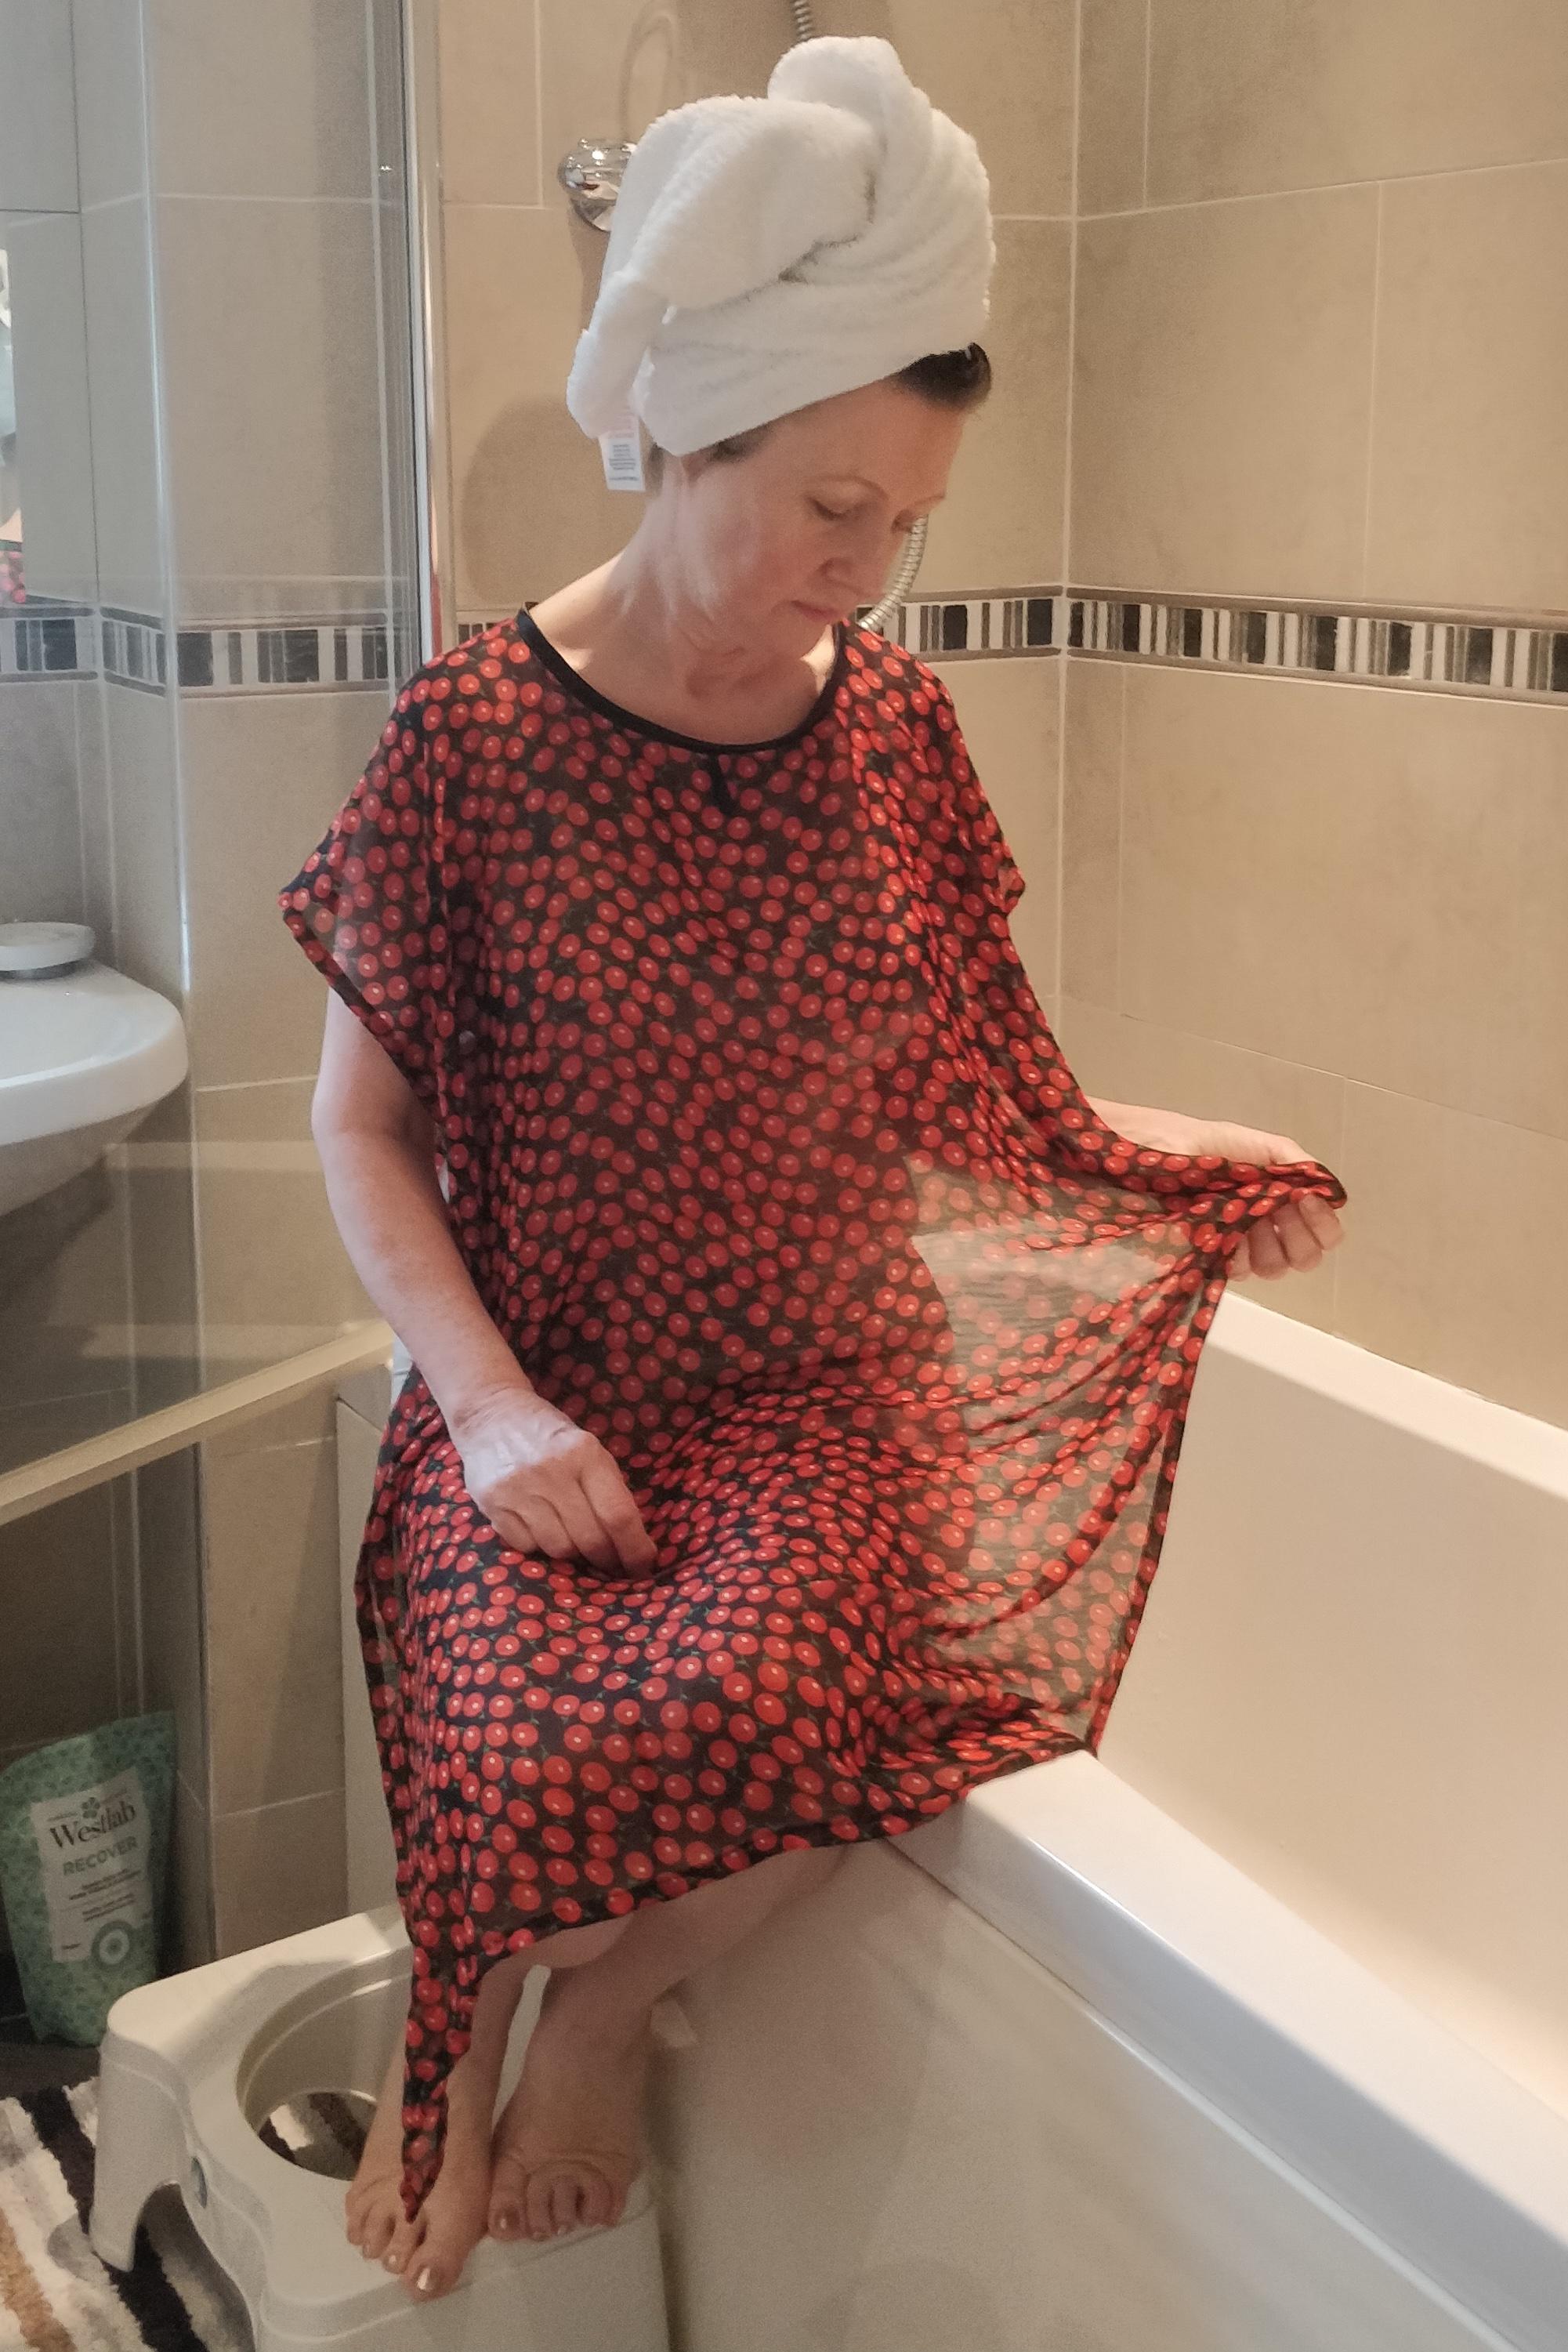 Black/Ruby NeverNaked(tm) Shower Drapron® to provide modesty, dignity and privacy whilst being helped to shower or bathe. Shower modesty wear. Bathing modesty gown. Lightweight crepe chiffon. Slips over shoulders - No sleeves. Magnetic fastening at back